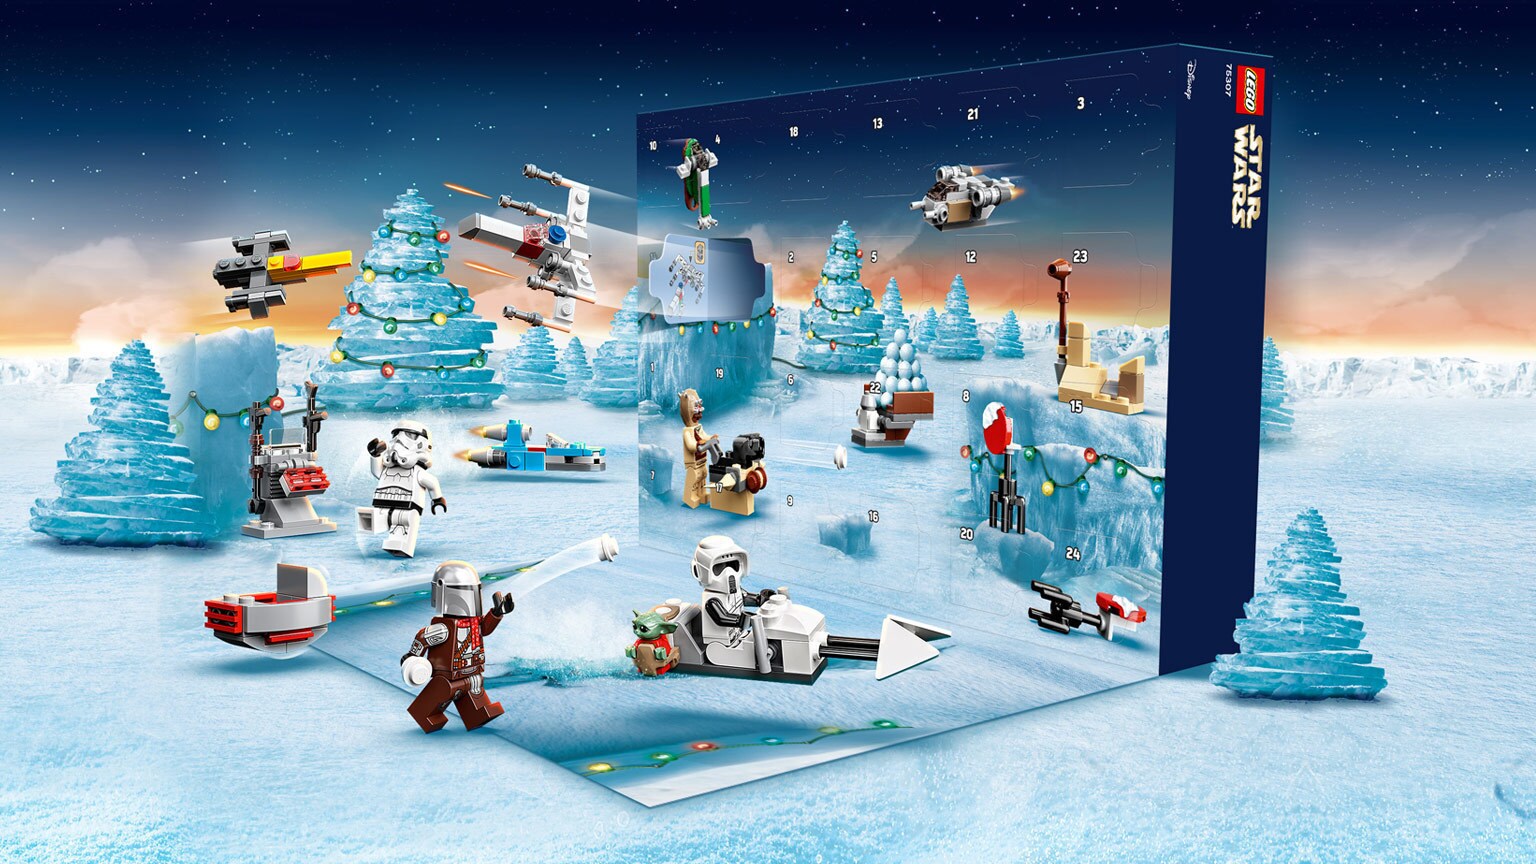 Mando Brings the Holiday Cheer with This Year’s LEGO Star Wars Advent Calendar - Exclusive Reveal